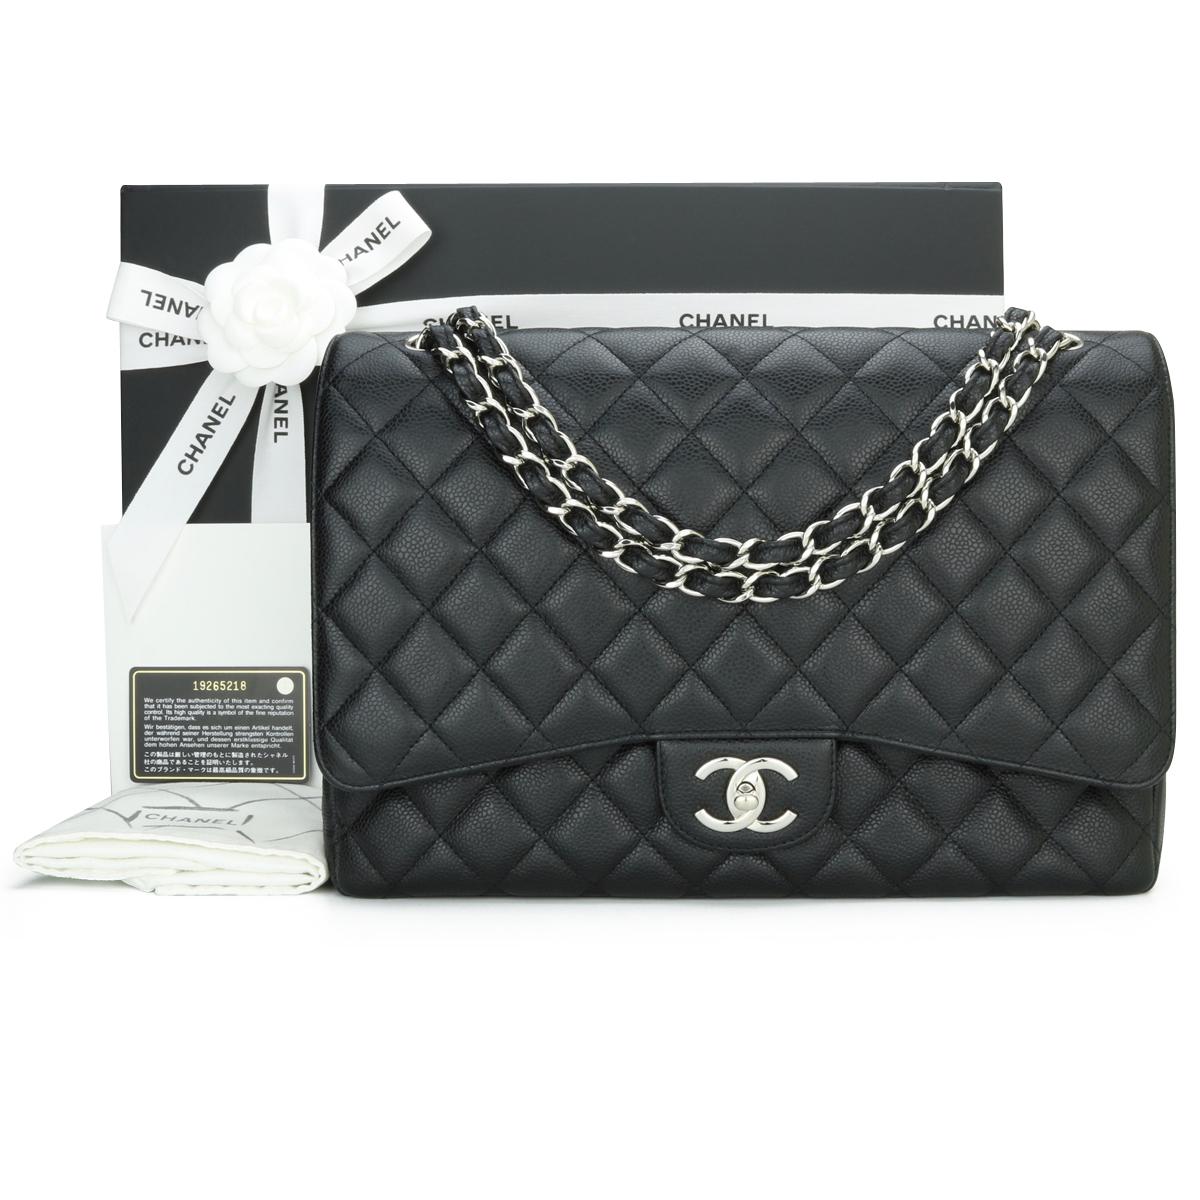 CHANEL Classic Double Flap Maxi Bag Black Caviar with Silver Hardware 2014.

This stunning bag is in very good condition, the bag still holds its original shape, and the hardware is still very shiny.

- Exterior Condition: Very good condition.